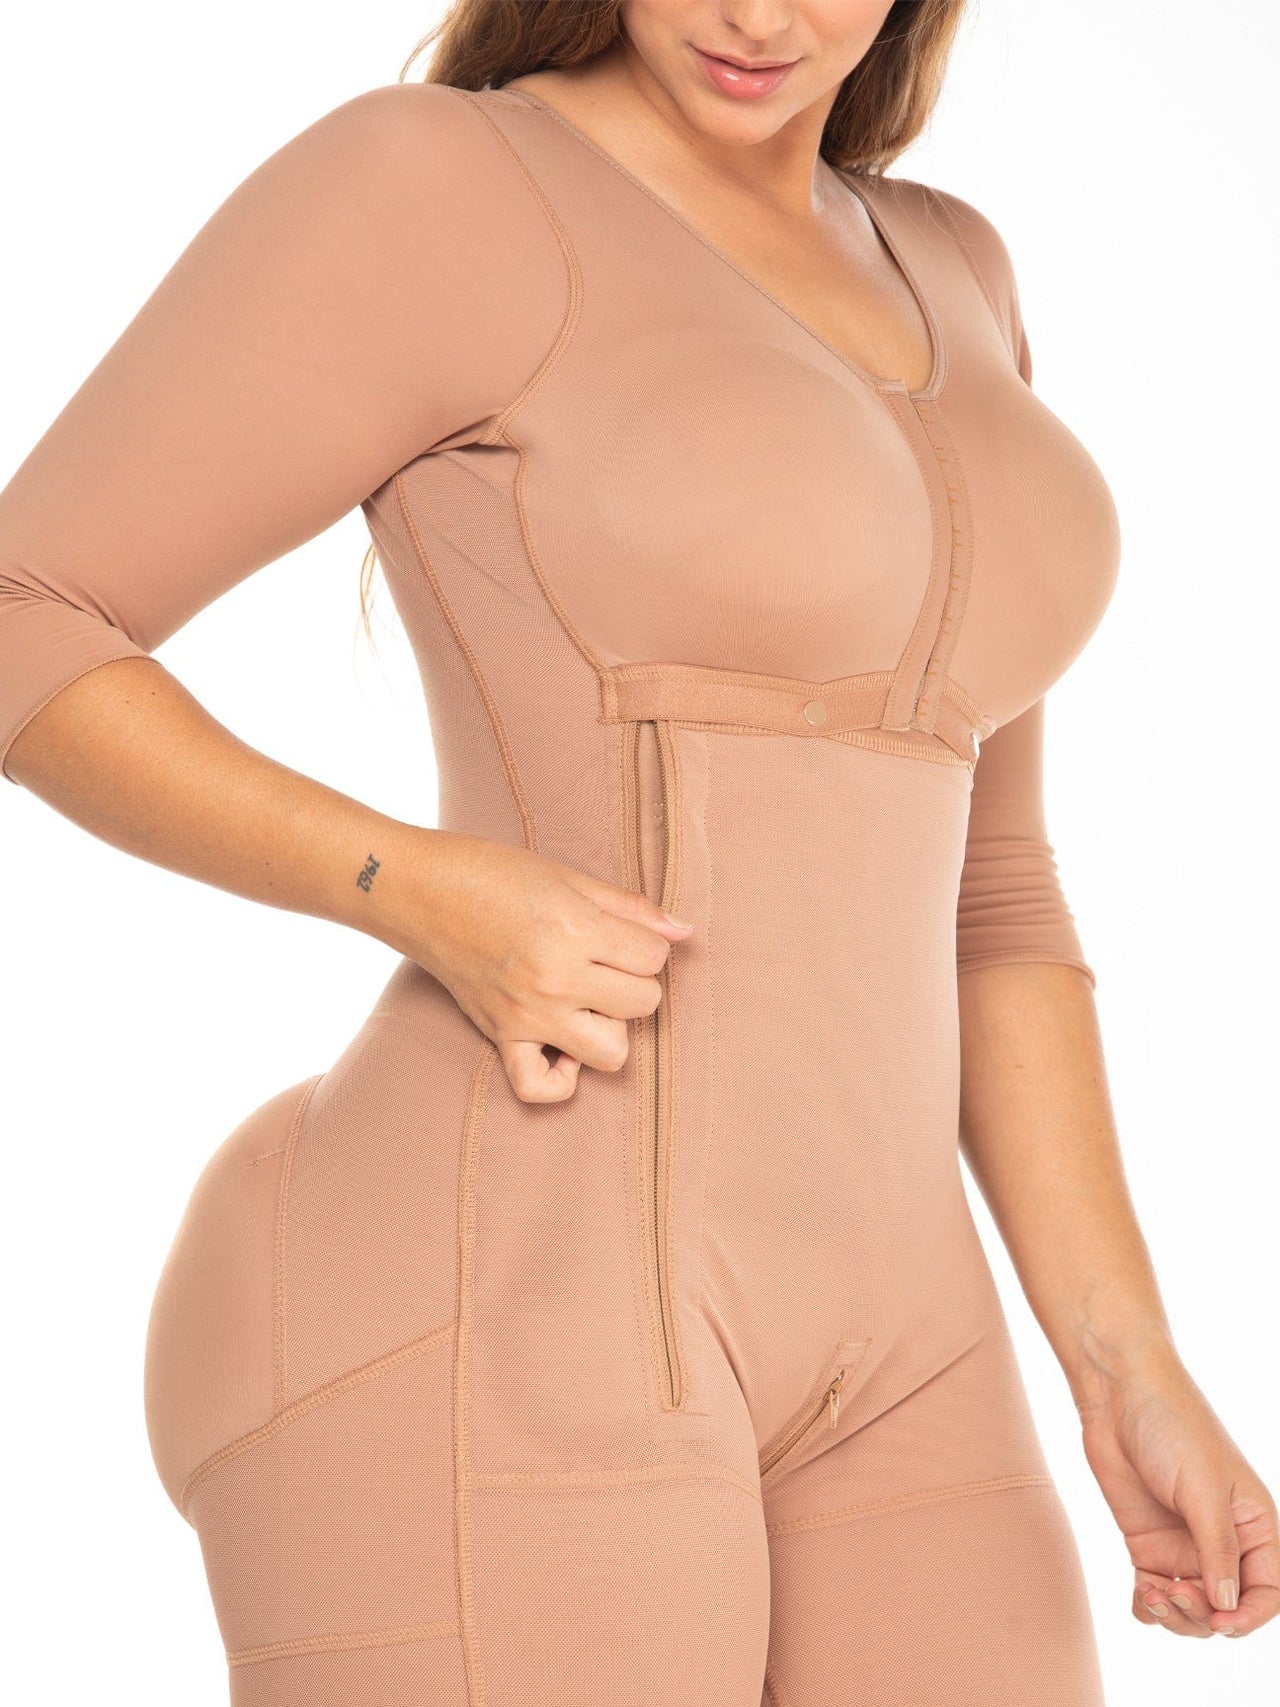 Full Body High Compression Shaper W/ Sleeves & Bra Included NS108